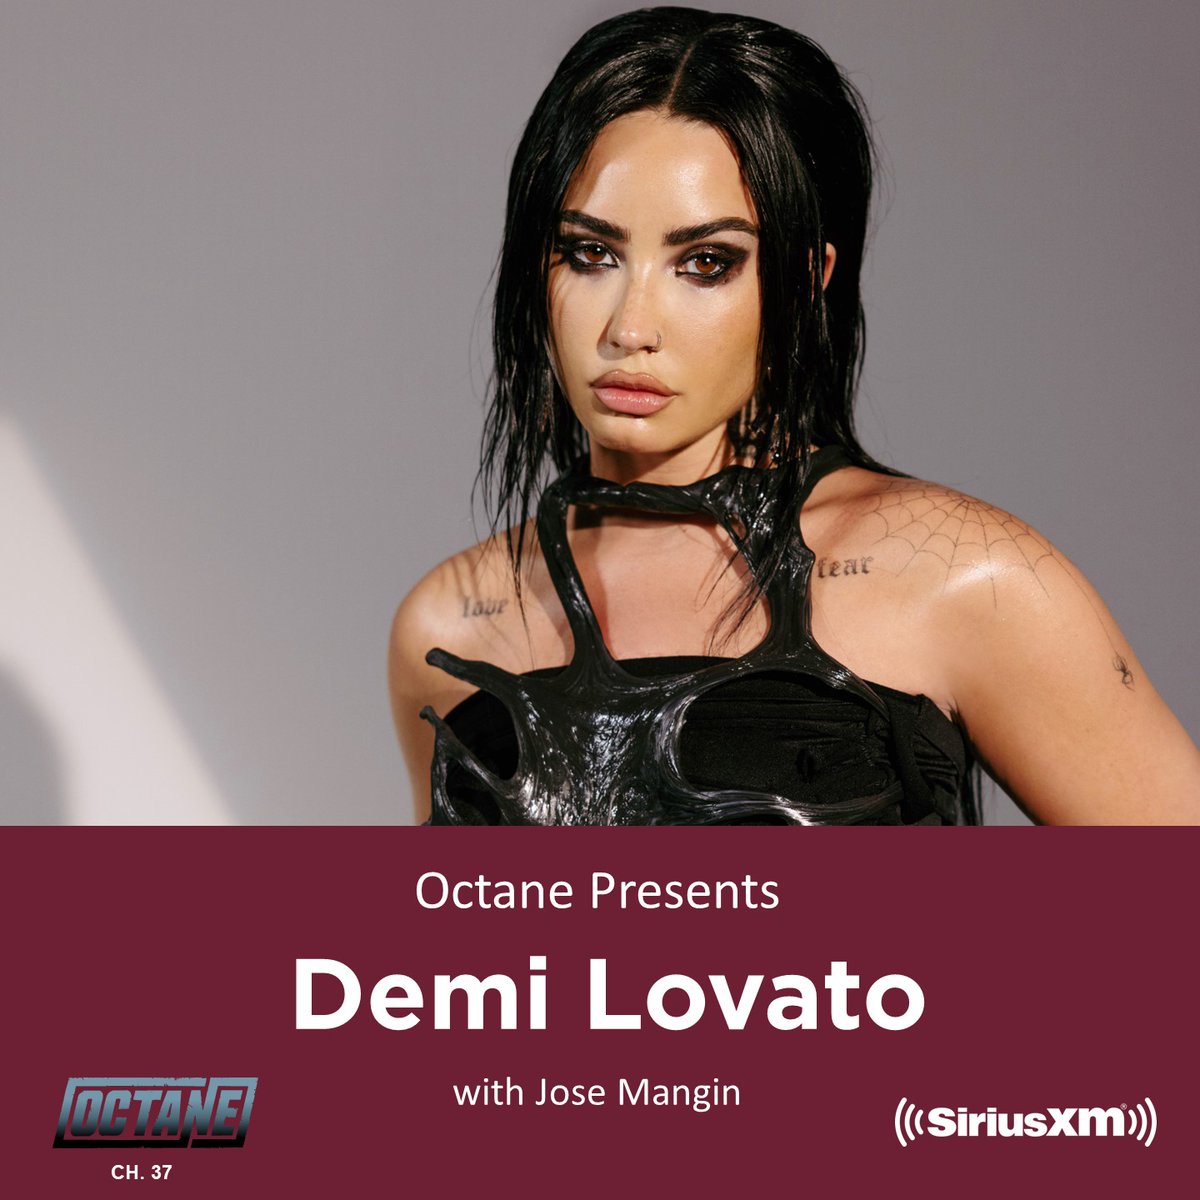 Here’s your chance for you and a guest to attend @SXMOctane Presents @ddlovato, a special event hosted by @josemangin to discuss Demi’s upcoming Rock Album, ‘Revamped’ at the SiriusXM Studios in NYC on 9/11. Visit: siriusxm.com/studioeventrul… for more info. No Purch Nec.